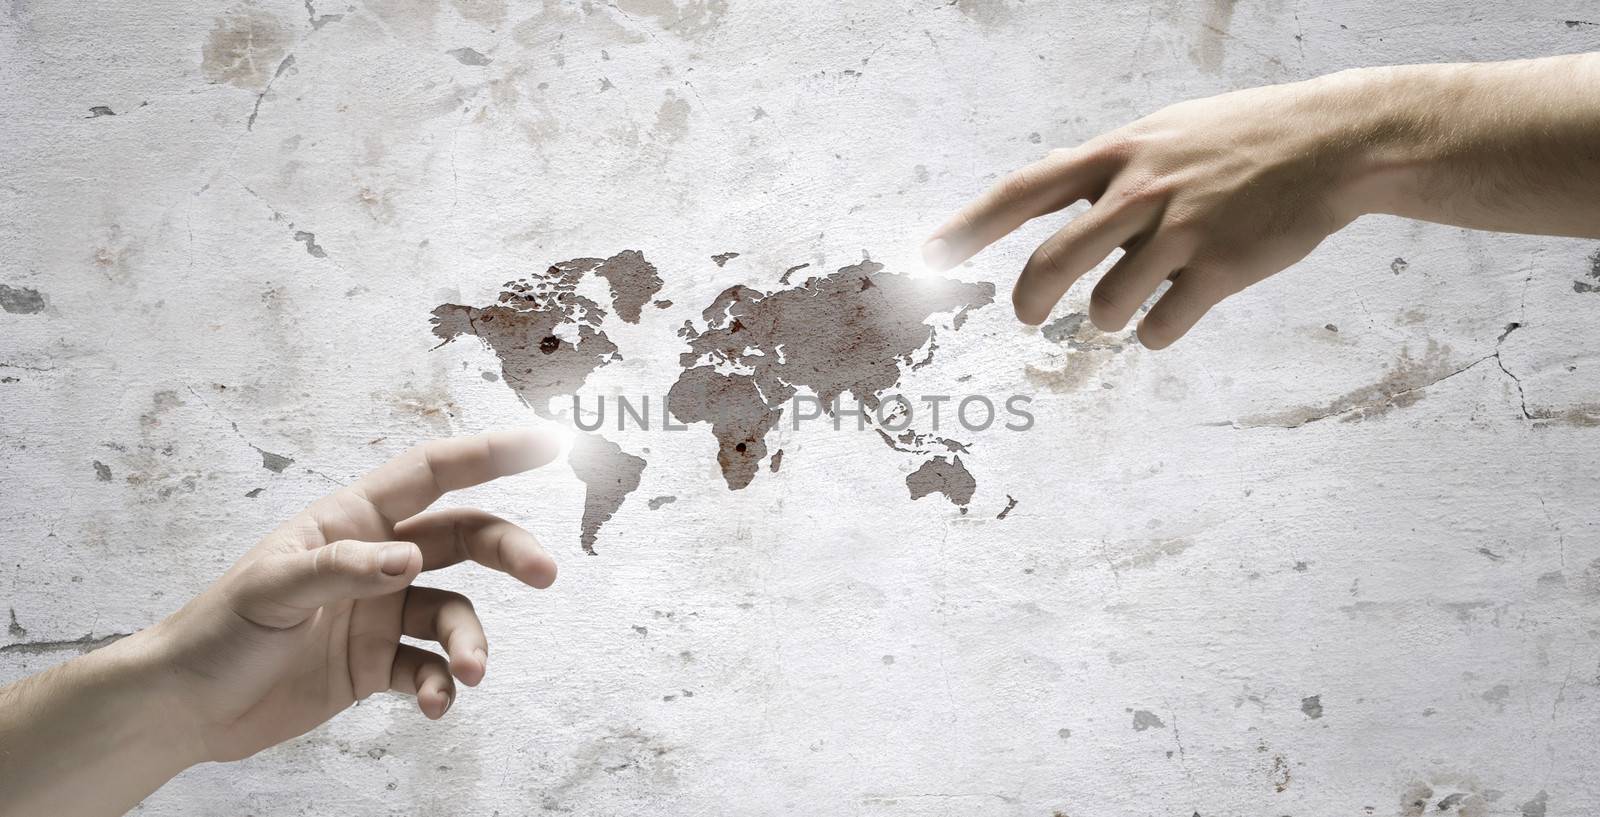 Close up of human hands touching with fingers. Elements of this image are furnished by NASA